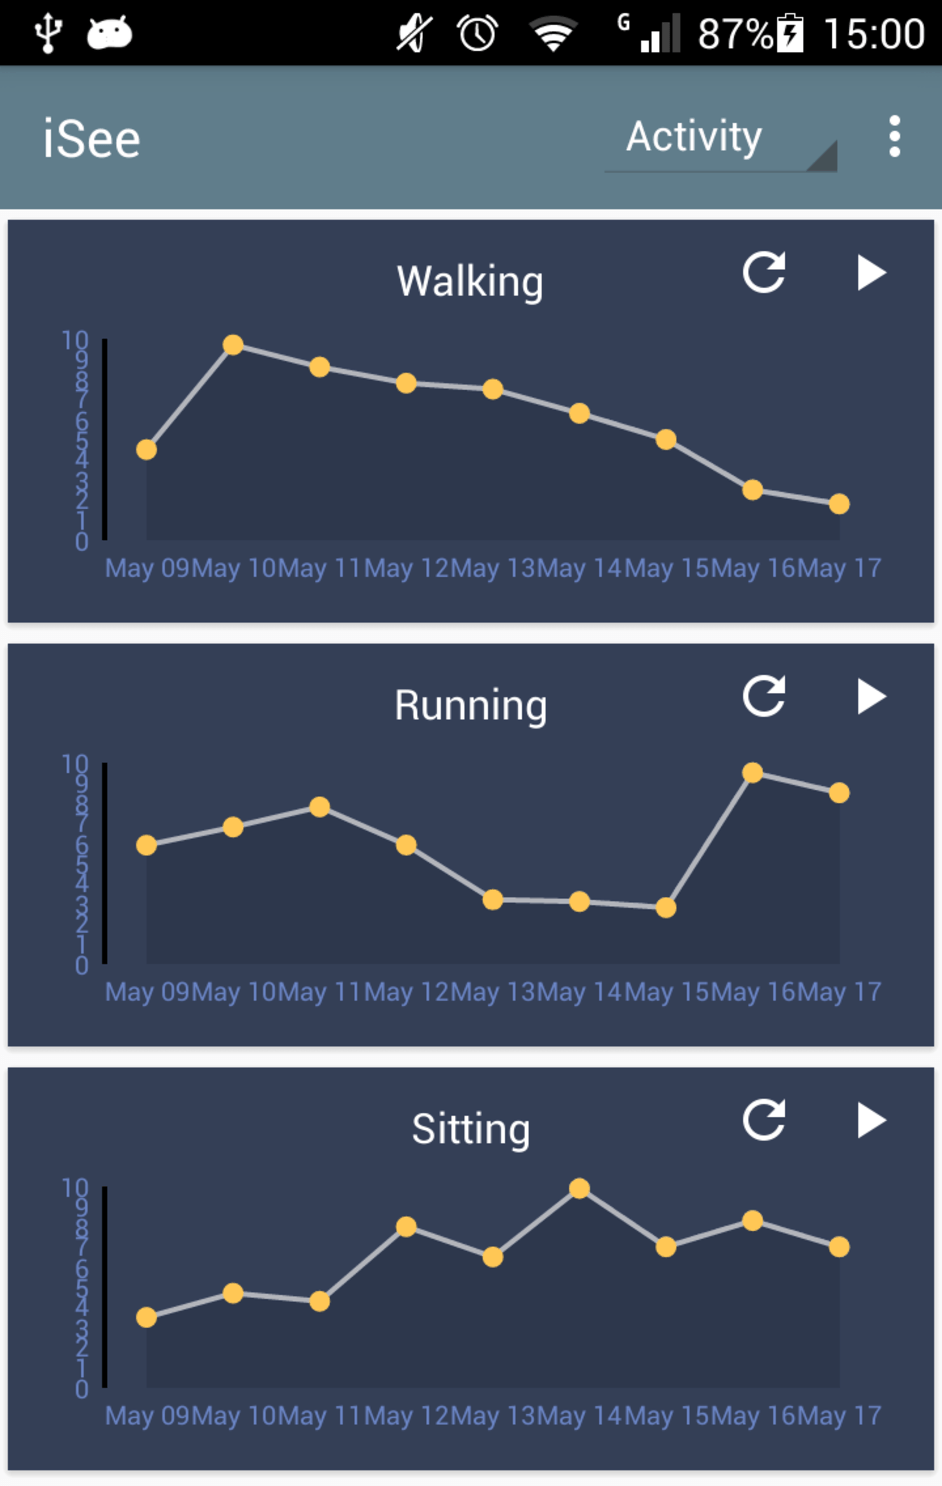 The iSee app’s main screen shows activity trends.